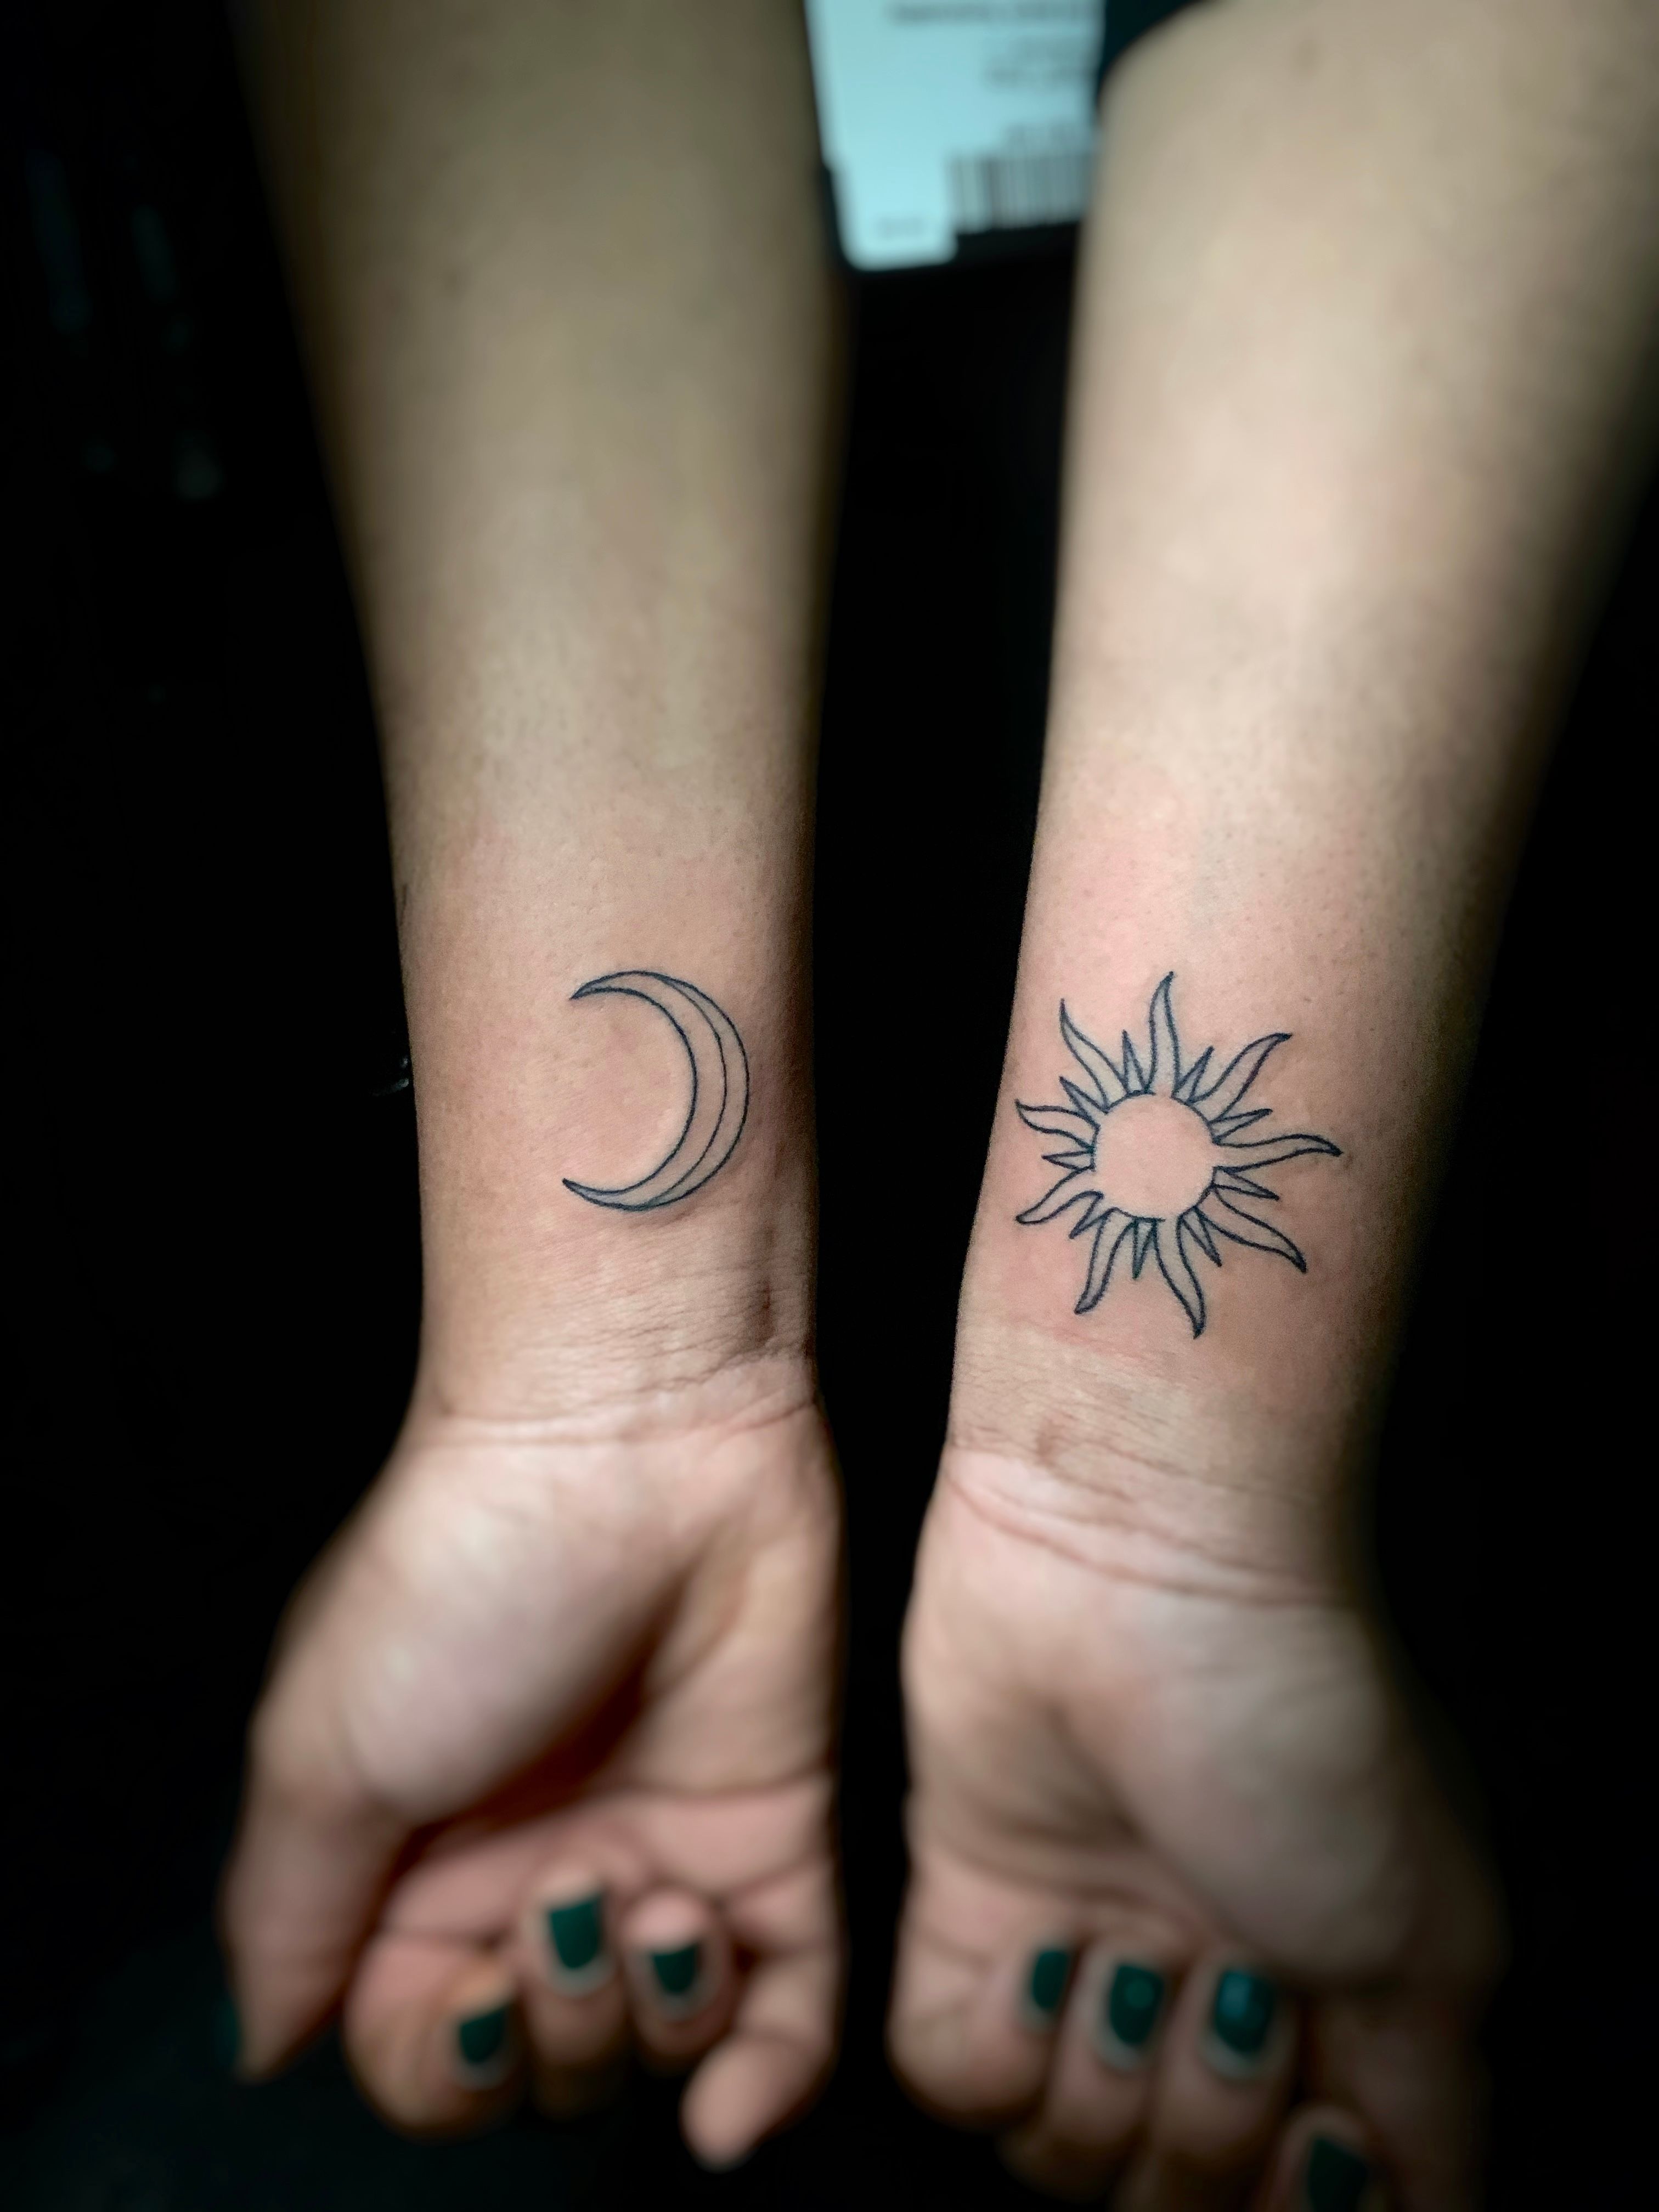 37 Cute Mini Tattoos of Moon and Stars For Women  Star tattoos Small moon  tattoos Small tattoos simple